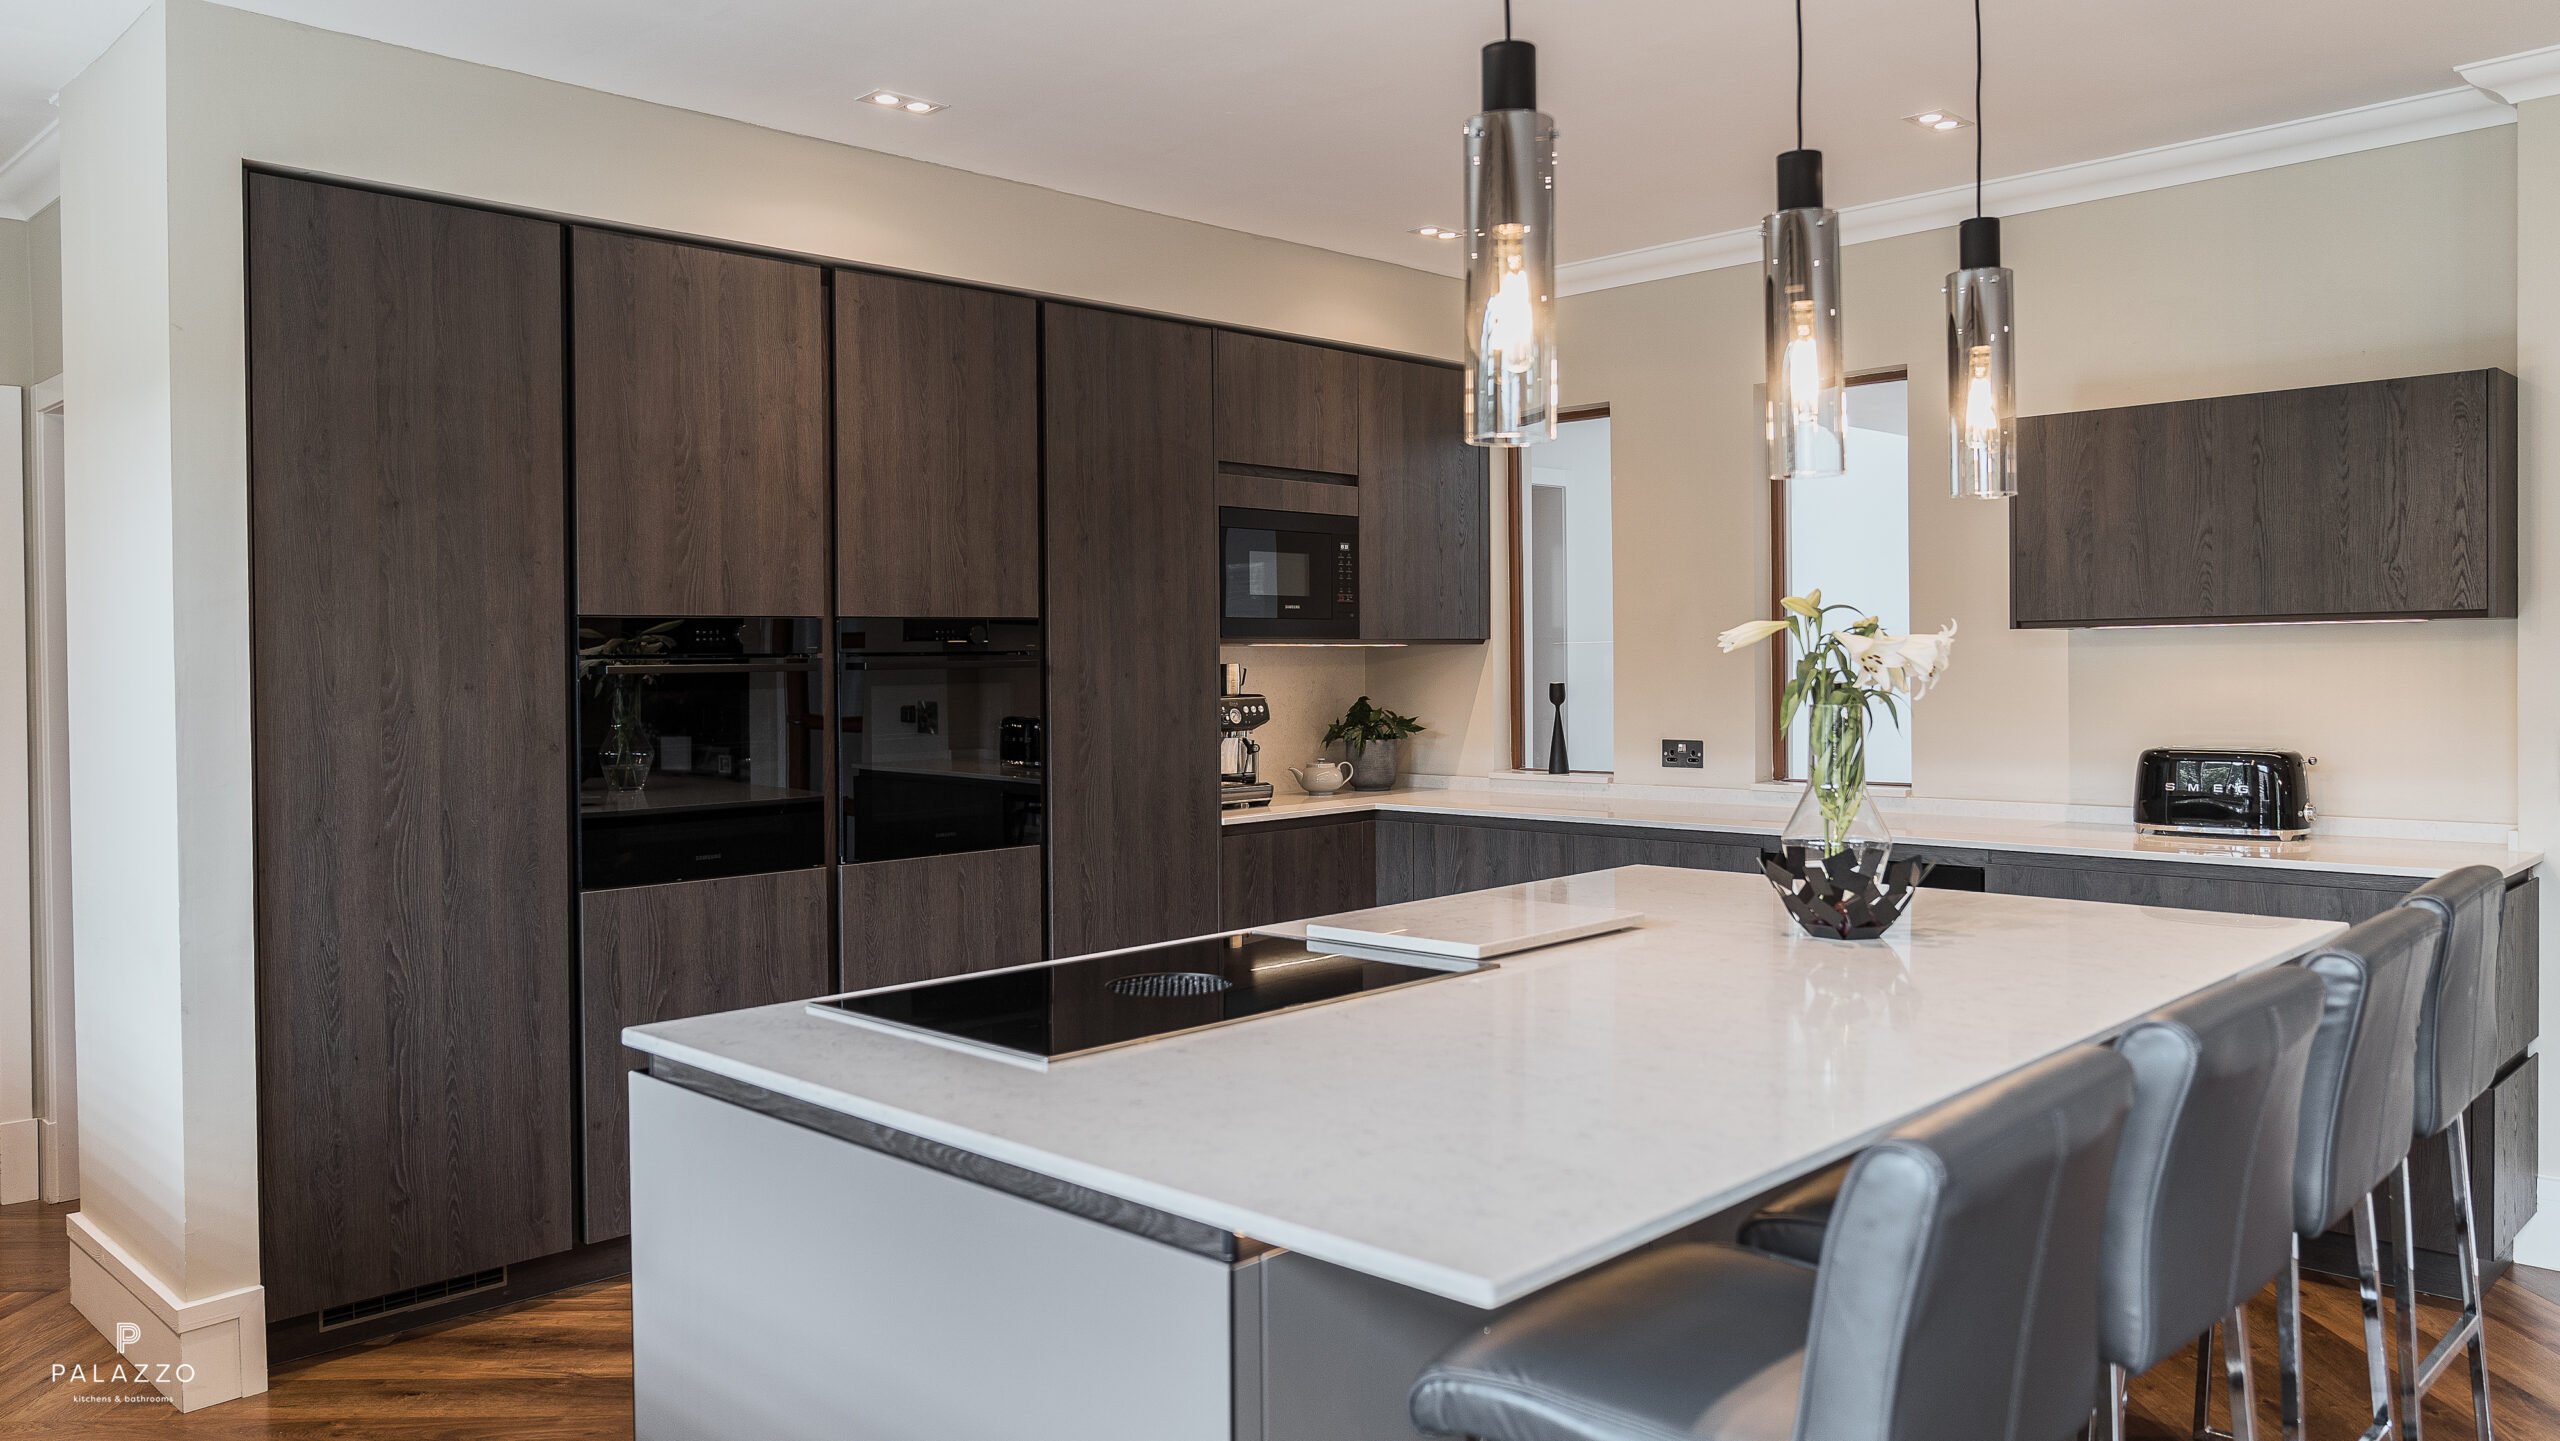 Image 12: A modern kitchen renovation project in Glasgow